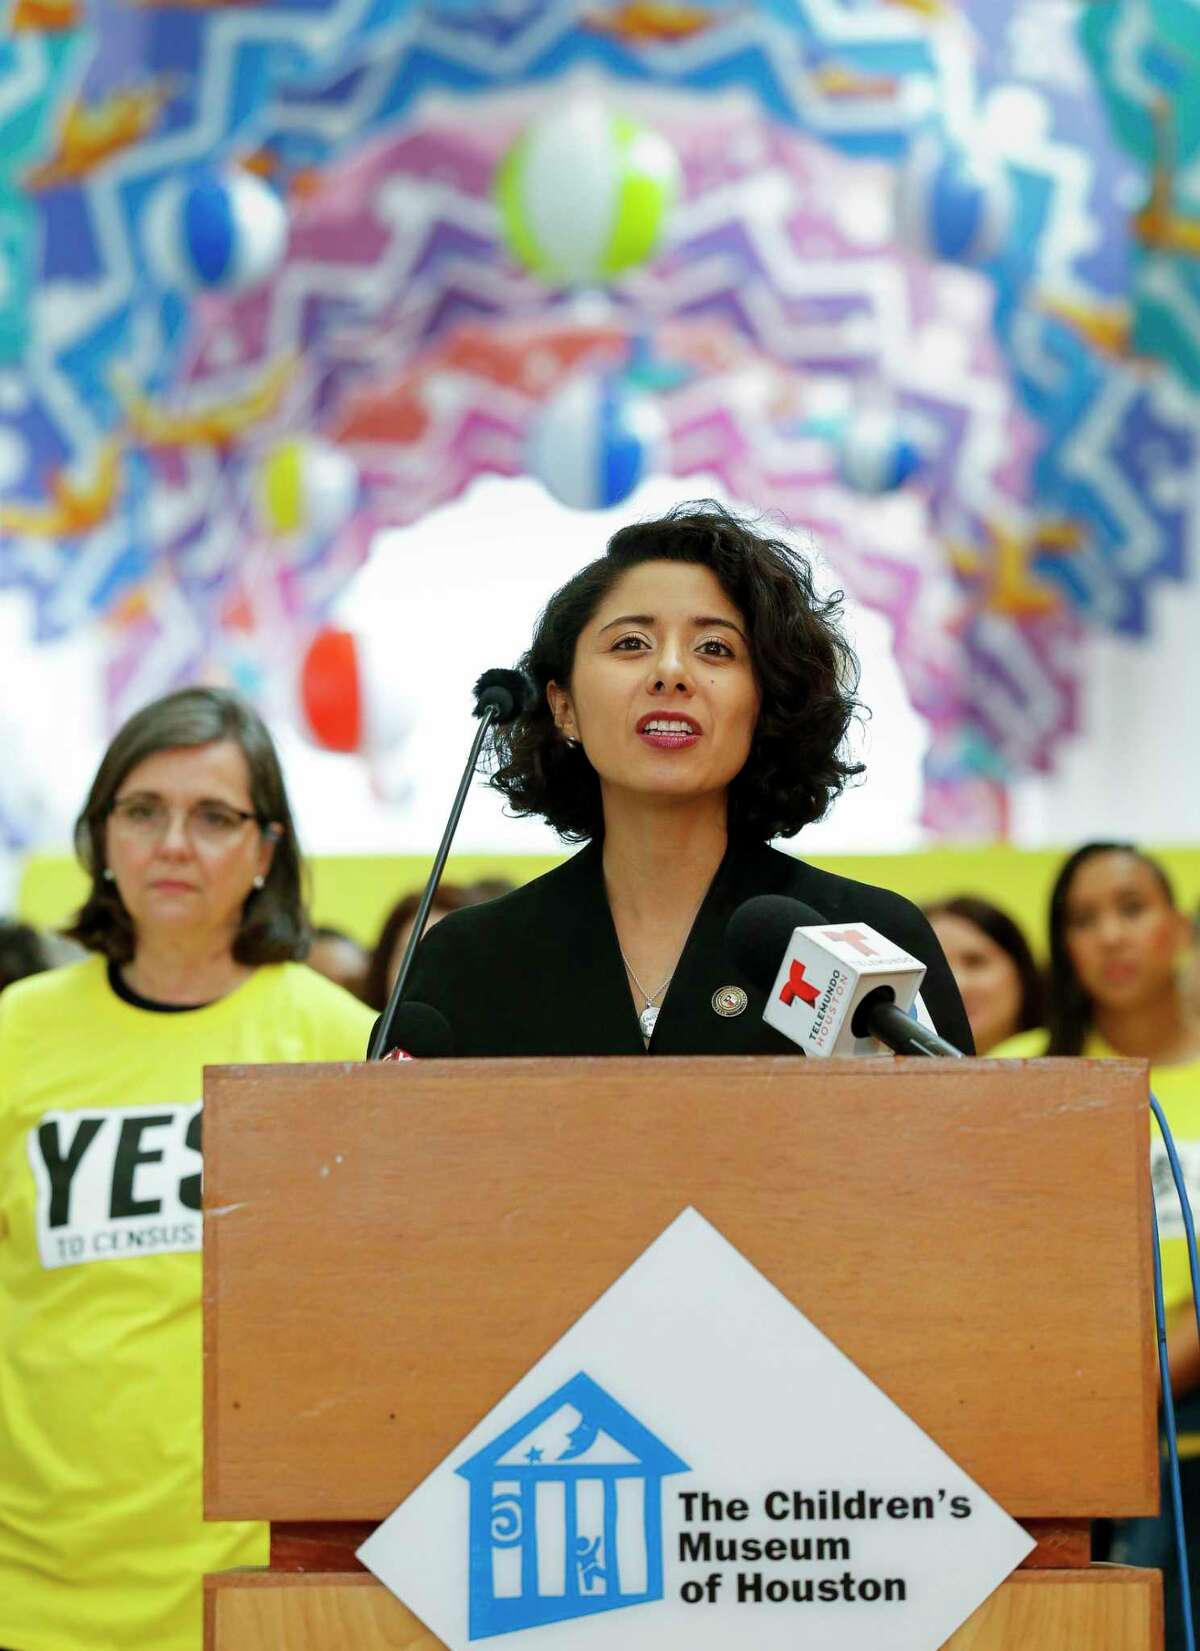 Harris County judge Lina Hidalgo conducts a press conference inside the Children’s Museum, kicking off the Houston and Harris County’s census drive campaign “Yes! to Census 2020,” Monday, March 2, 2020, in Houston.